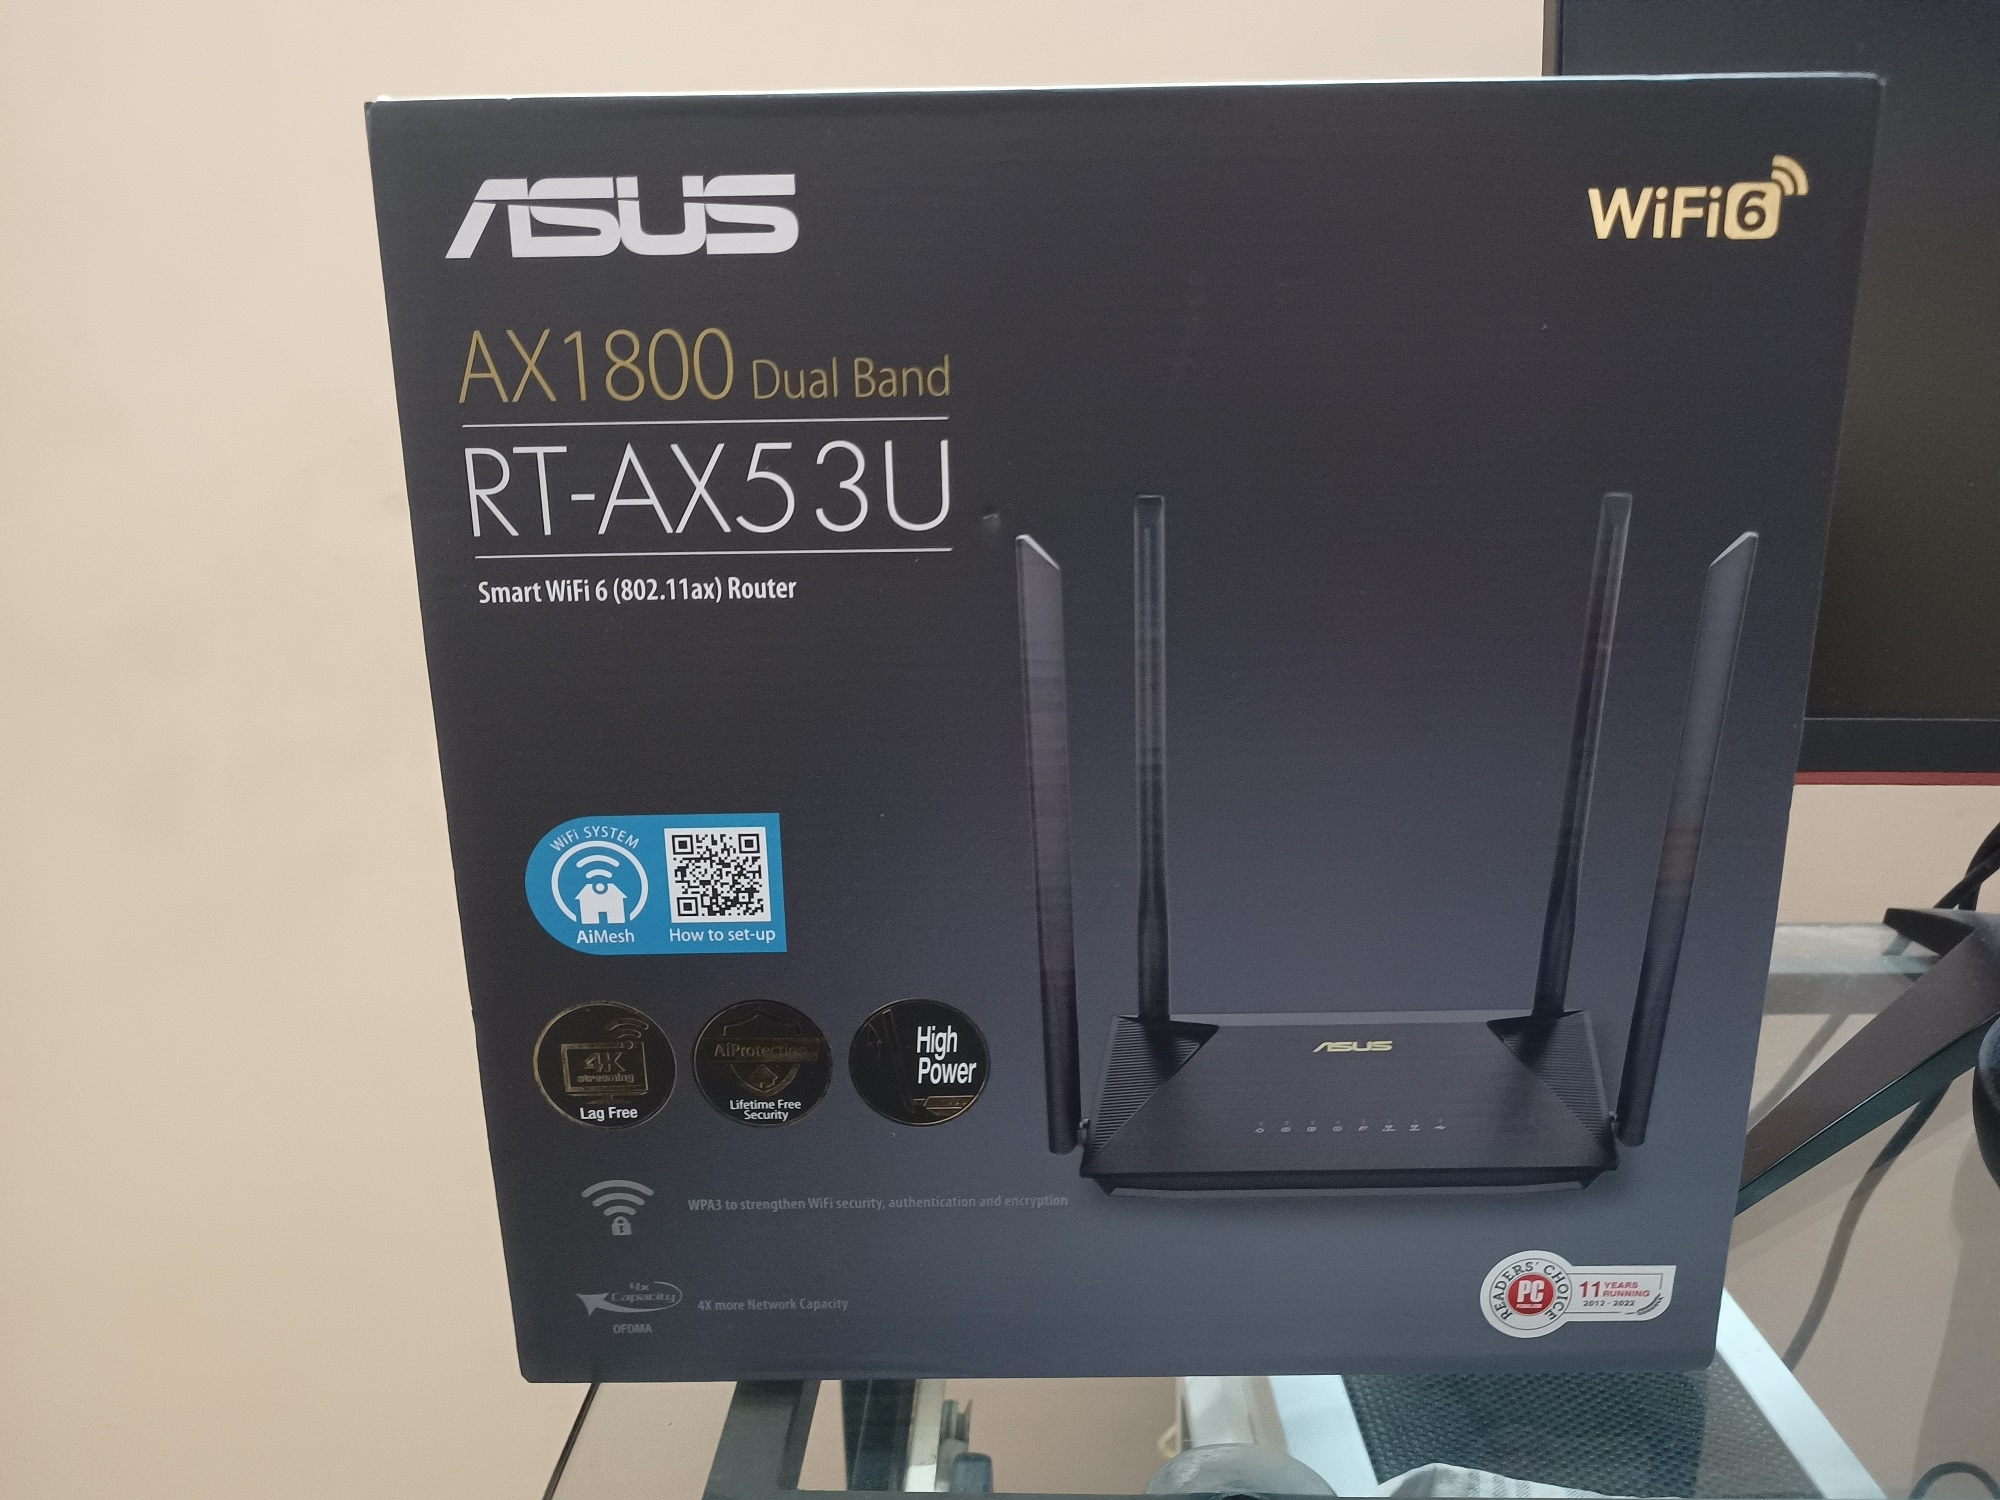 Asus_router_1.jpg